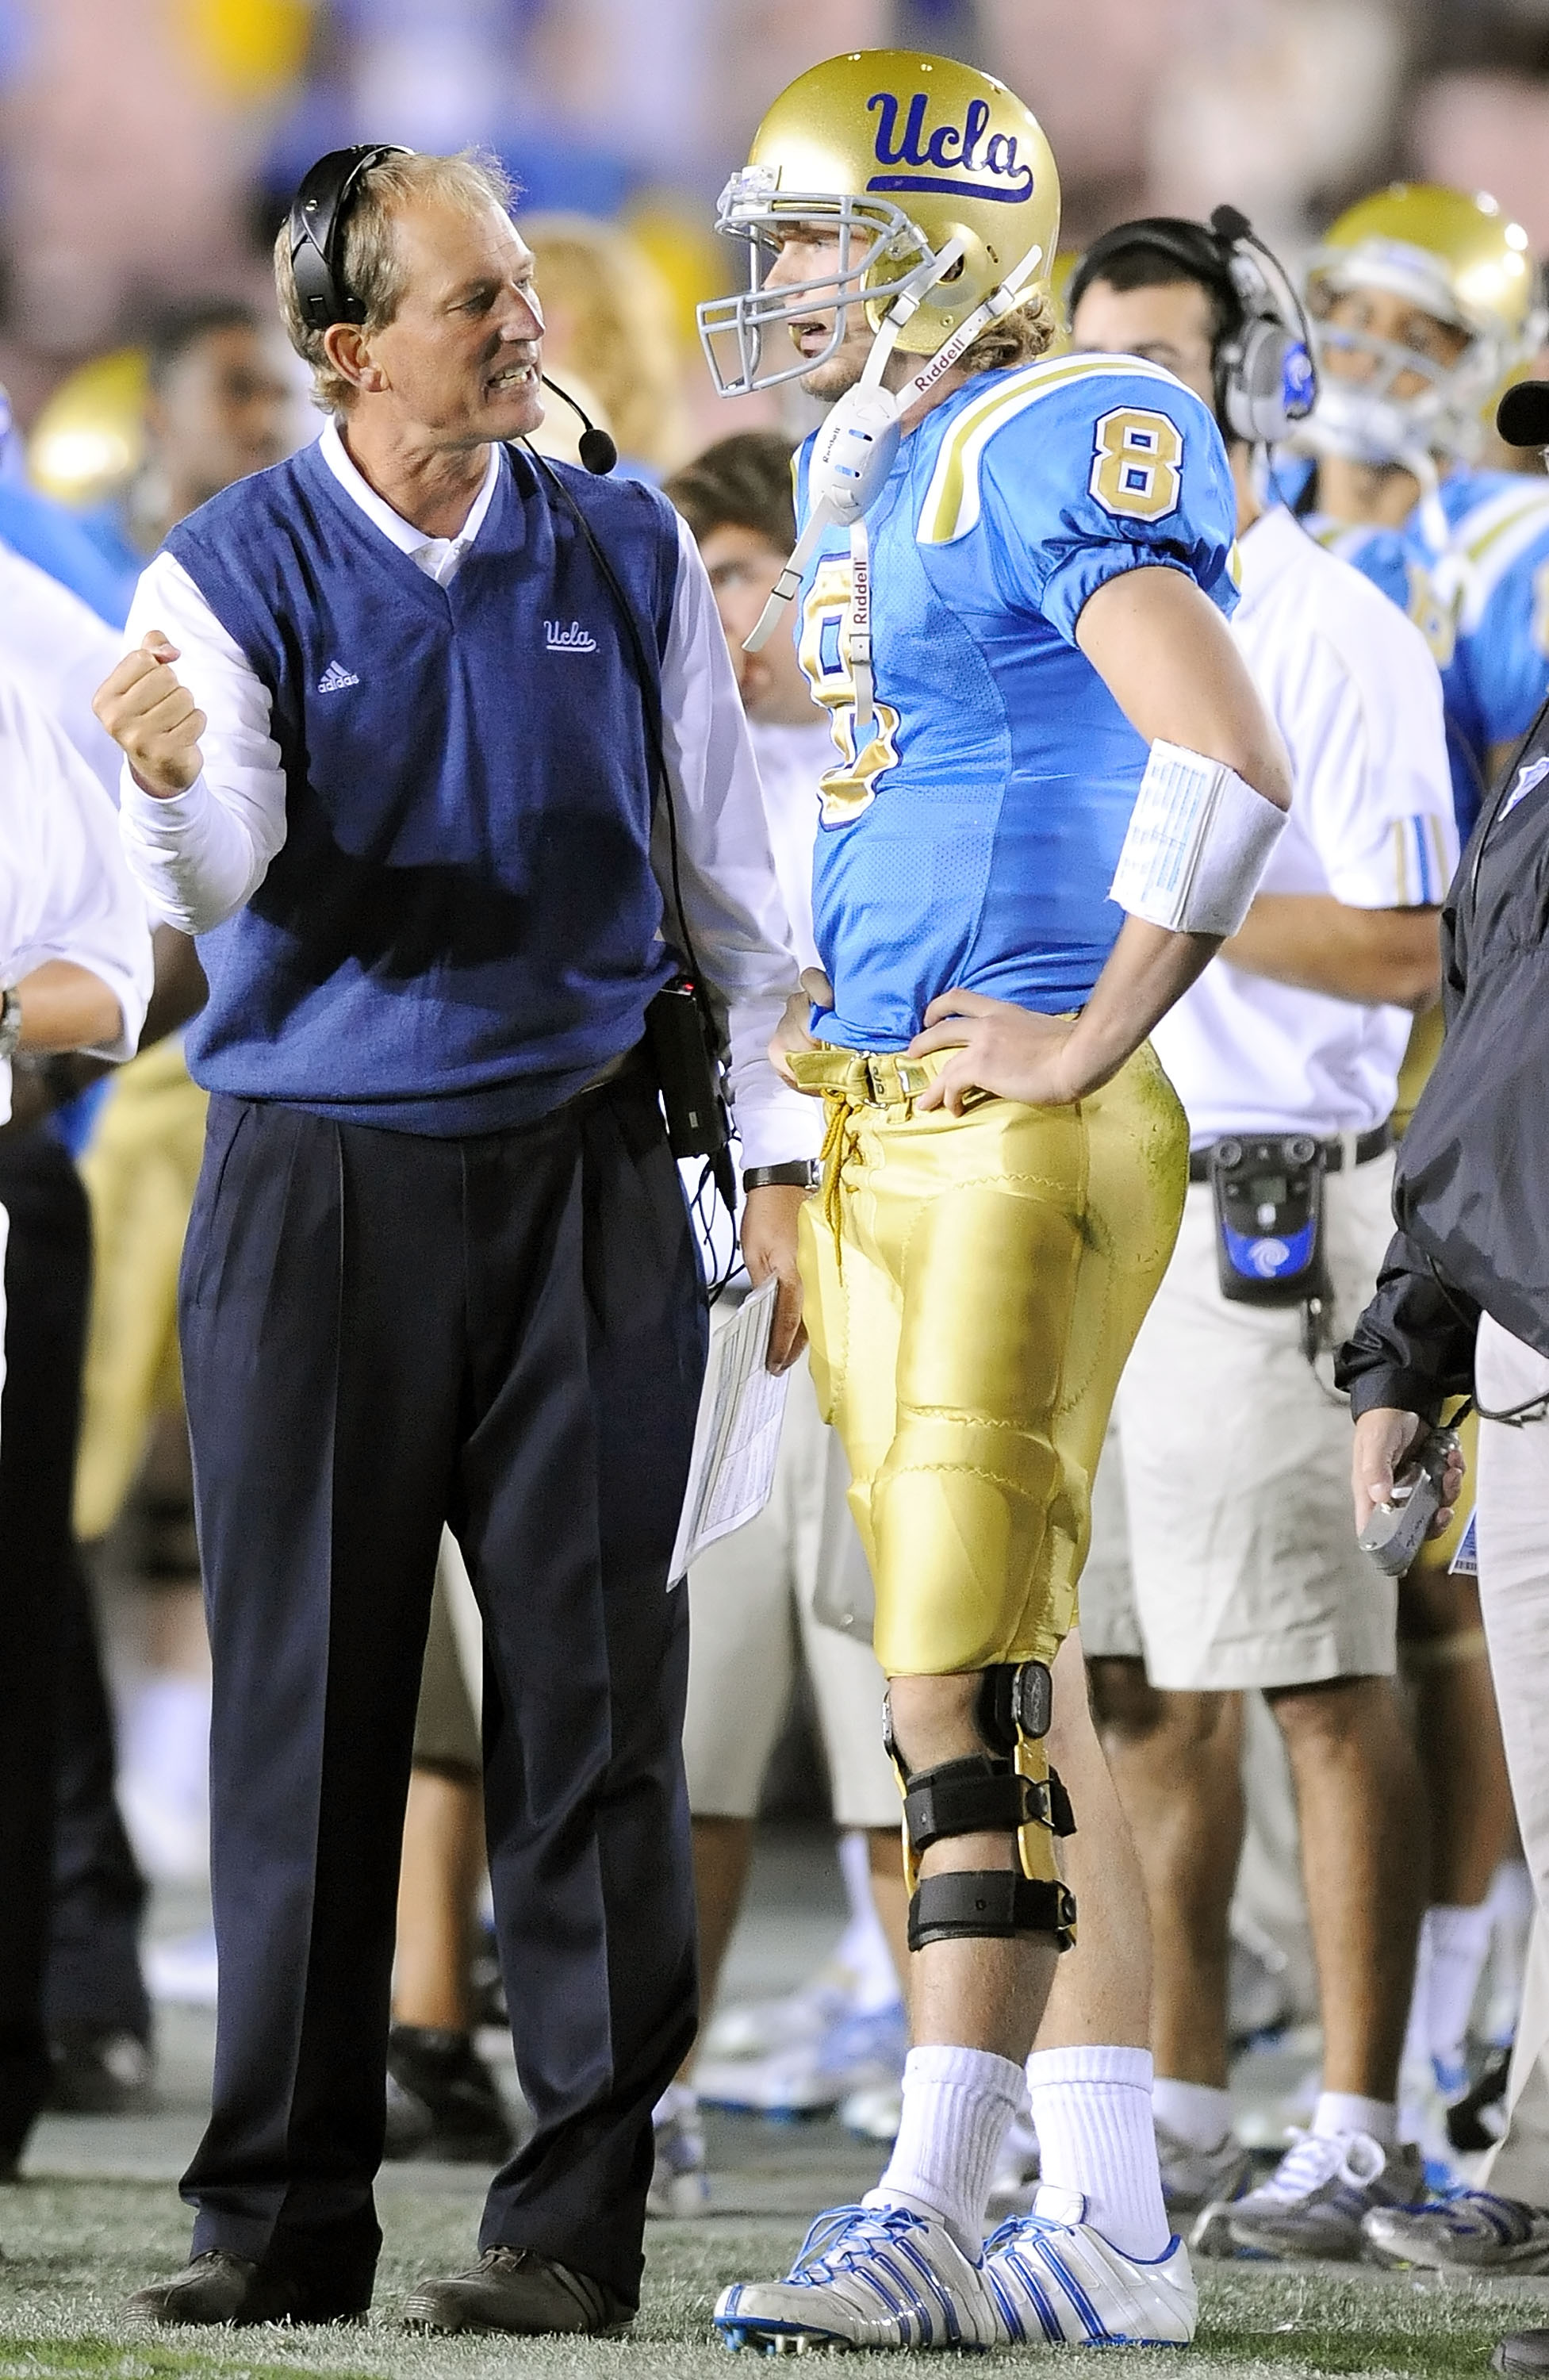 PASADENA, CA - NOVEMBER 08:  Head coach Rick Neuheisel talks with Chris Forcier #8 of the UCLA Bruins during the game against the Oregon State Beavers at the Pasadena Rose Bowl on November 8, 2008 in Pasadena, California.  (Photo by Lisa Blumenfeld/Getty